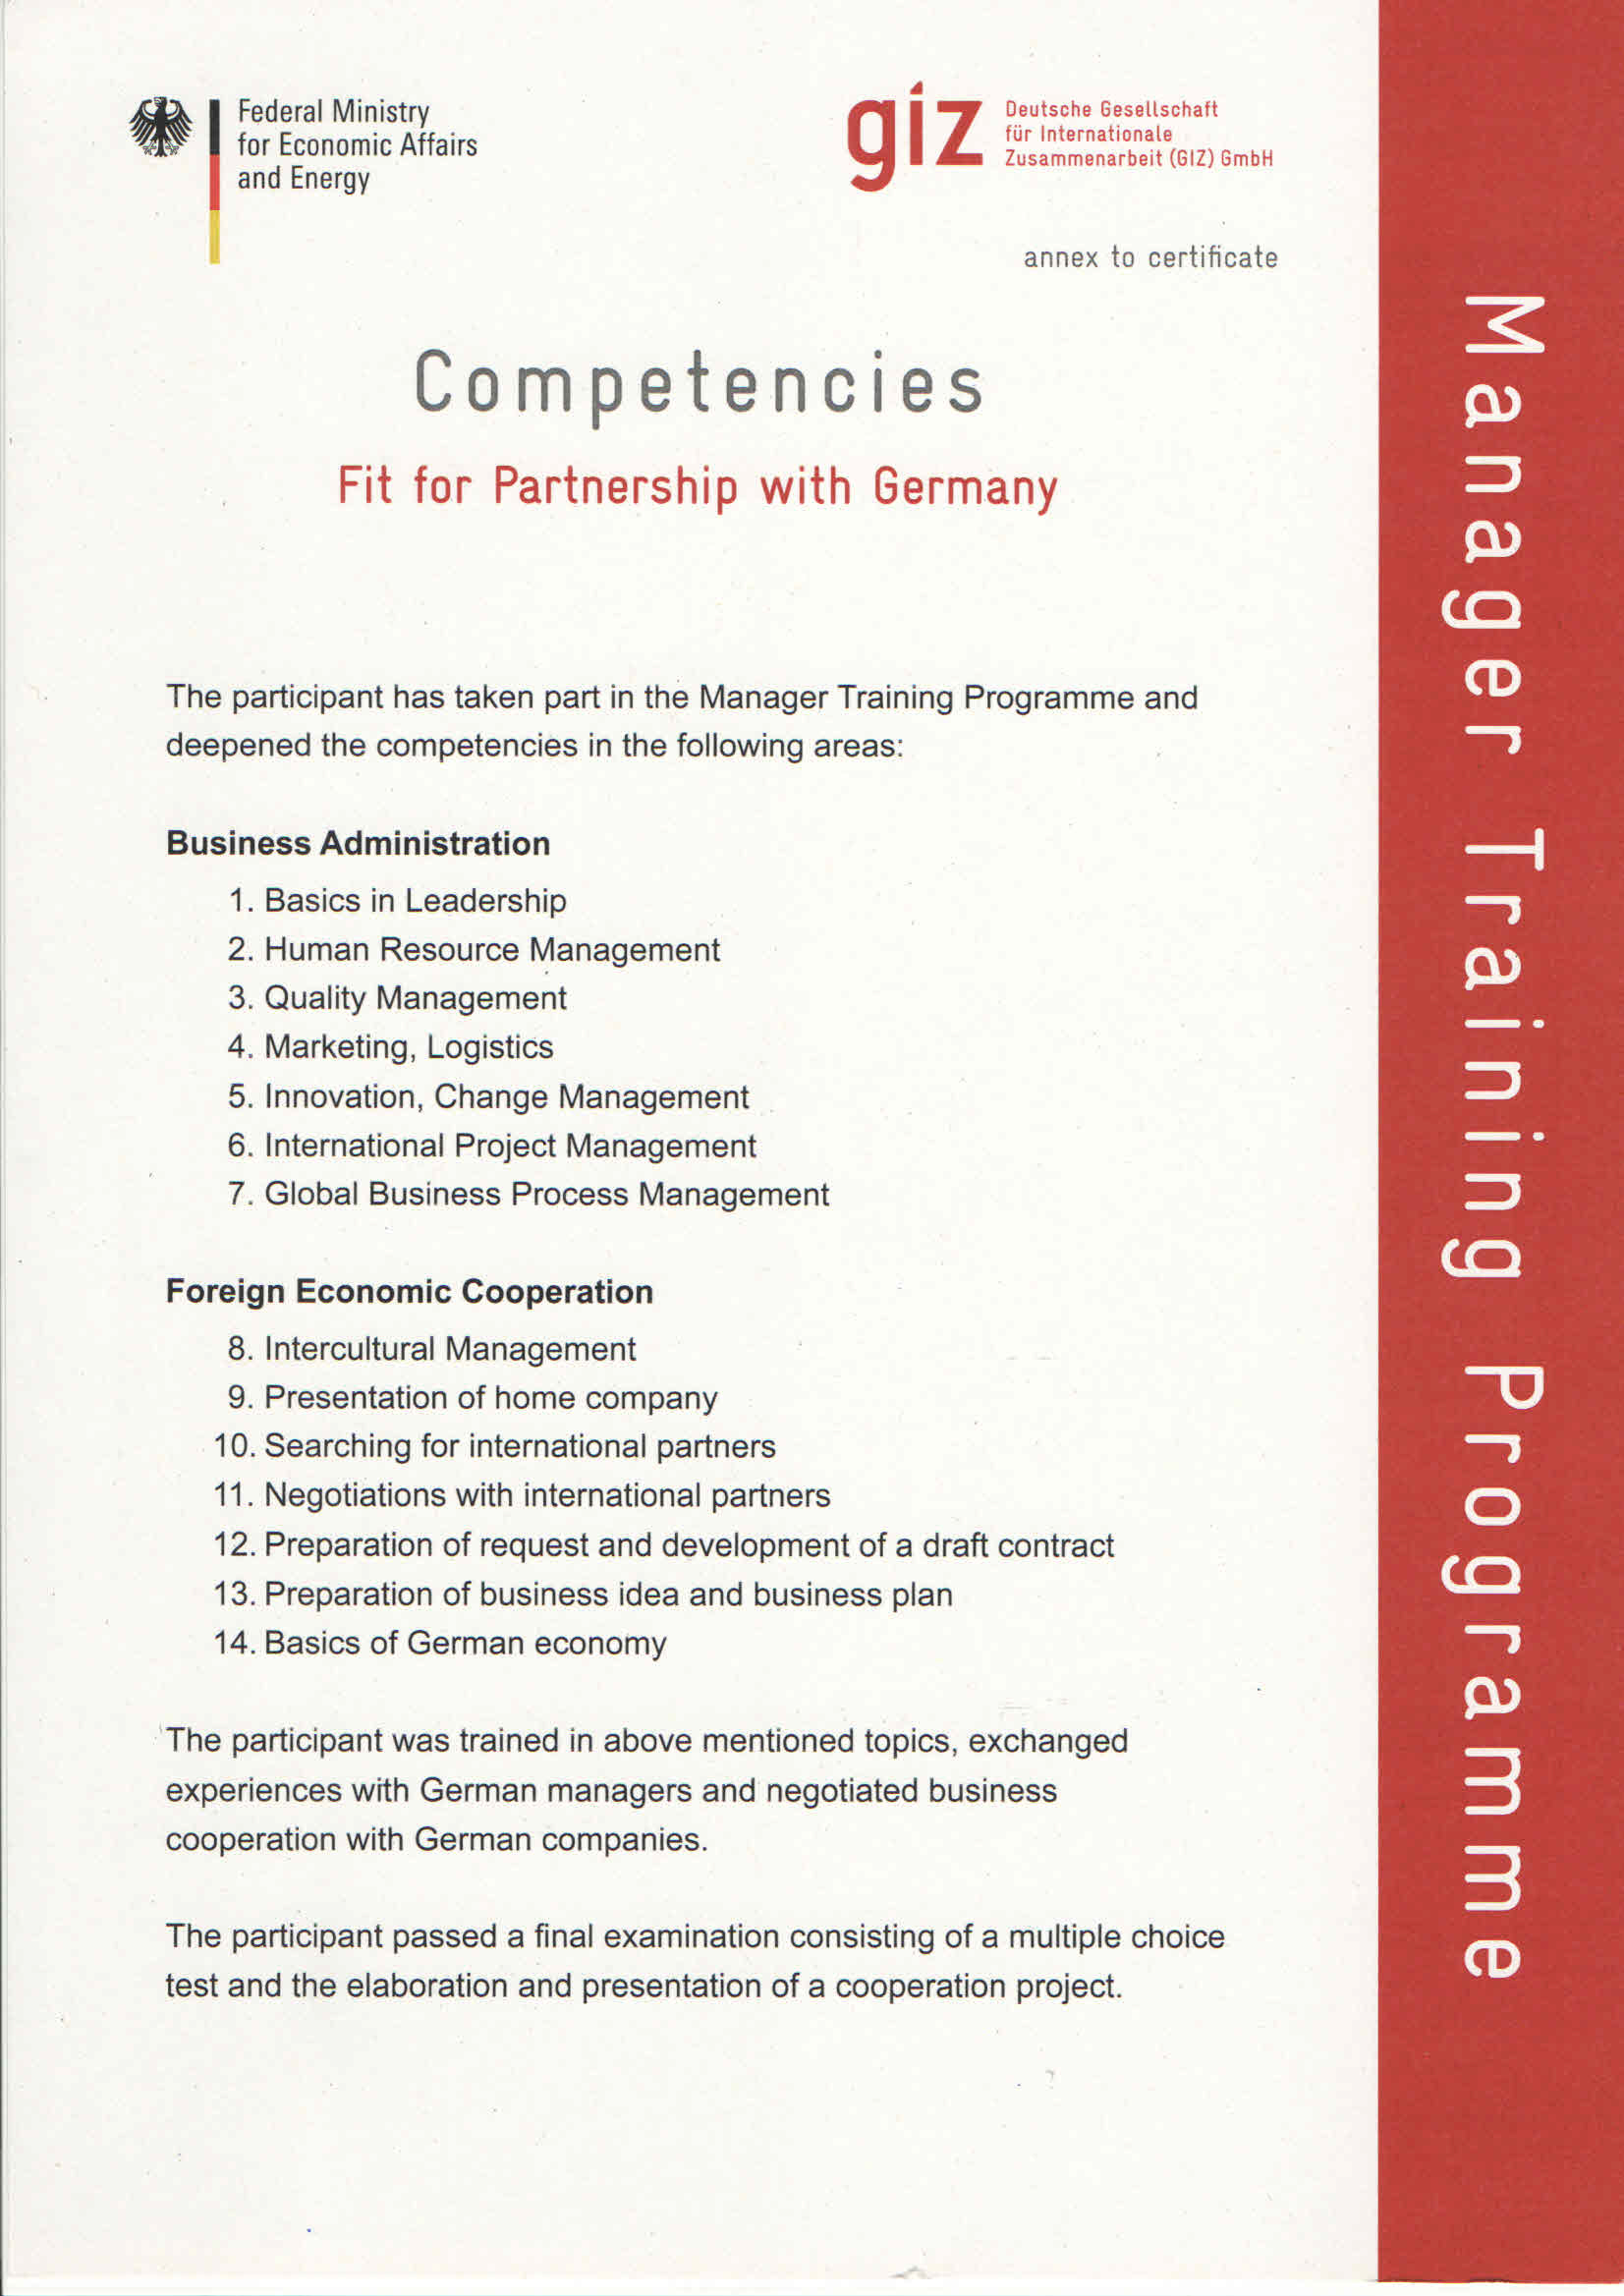 Competencies, Fit for Partnership with Germany